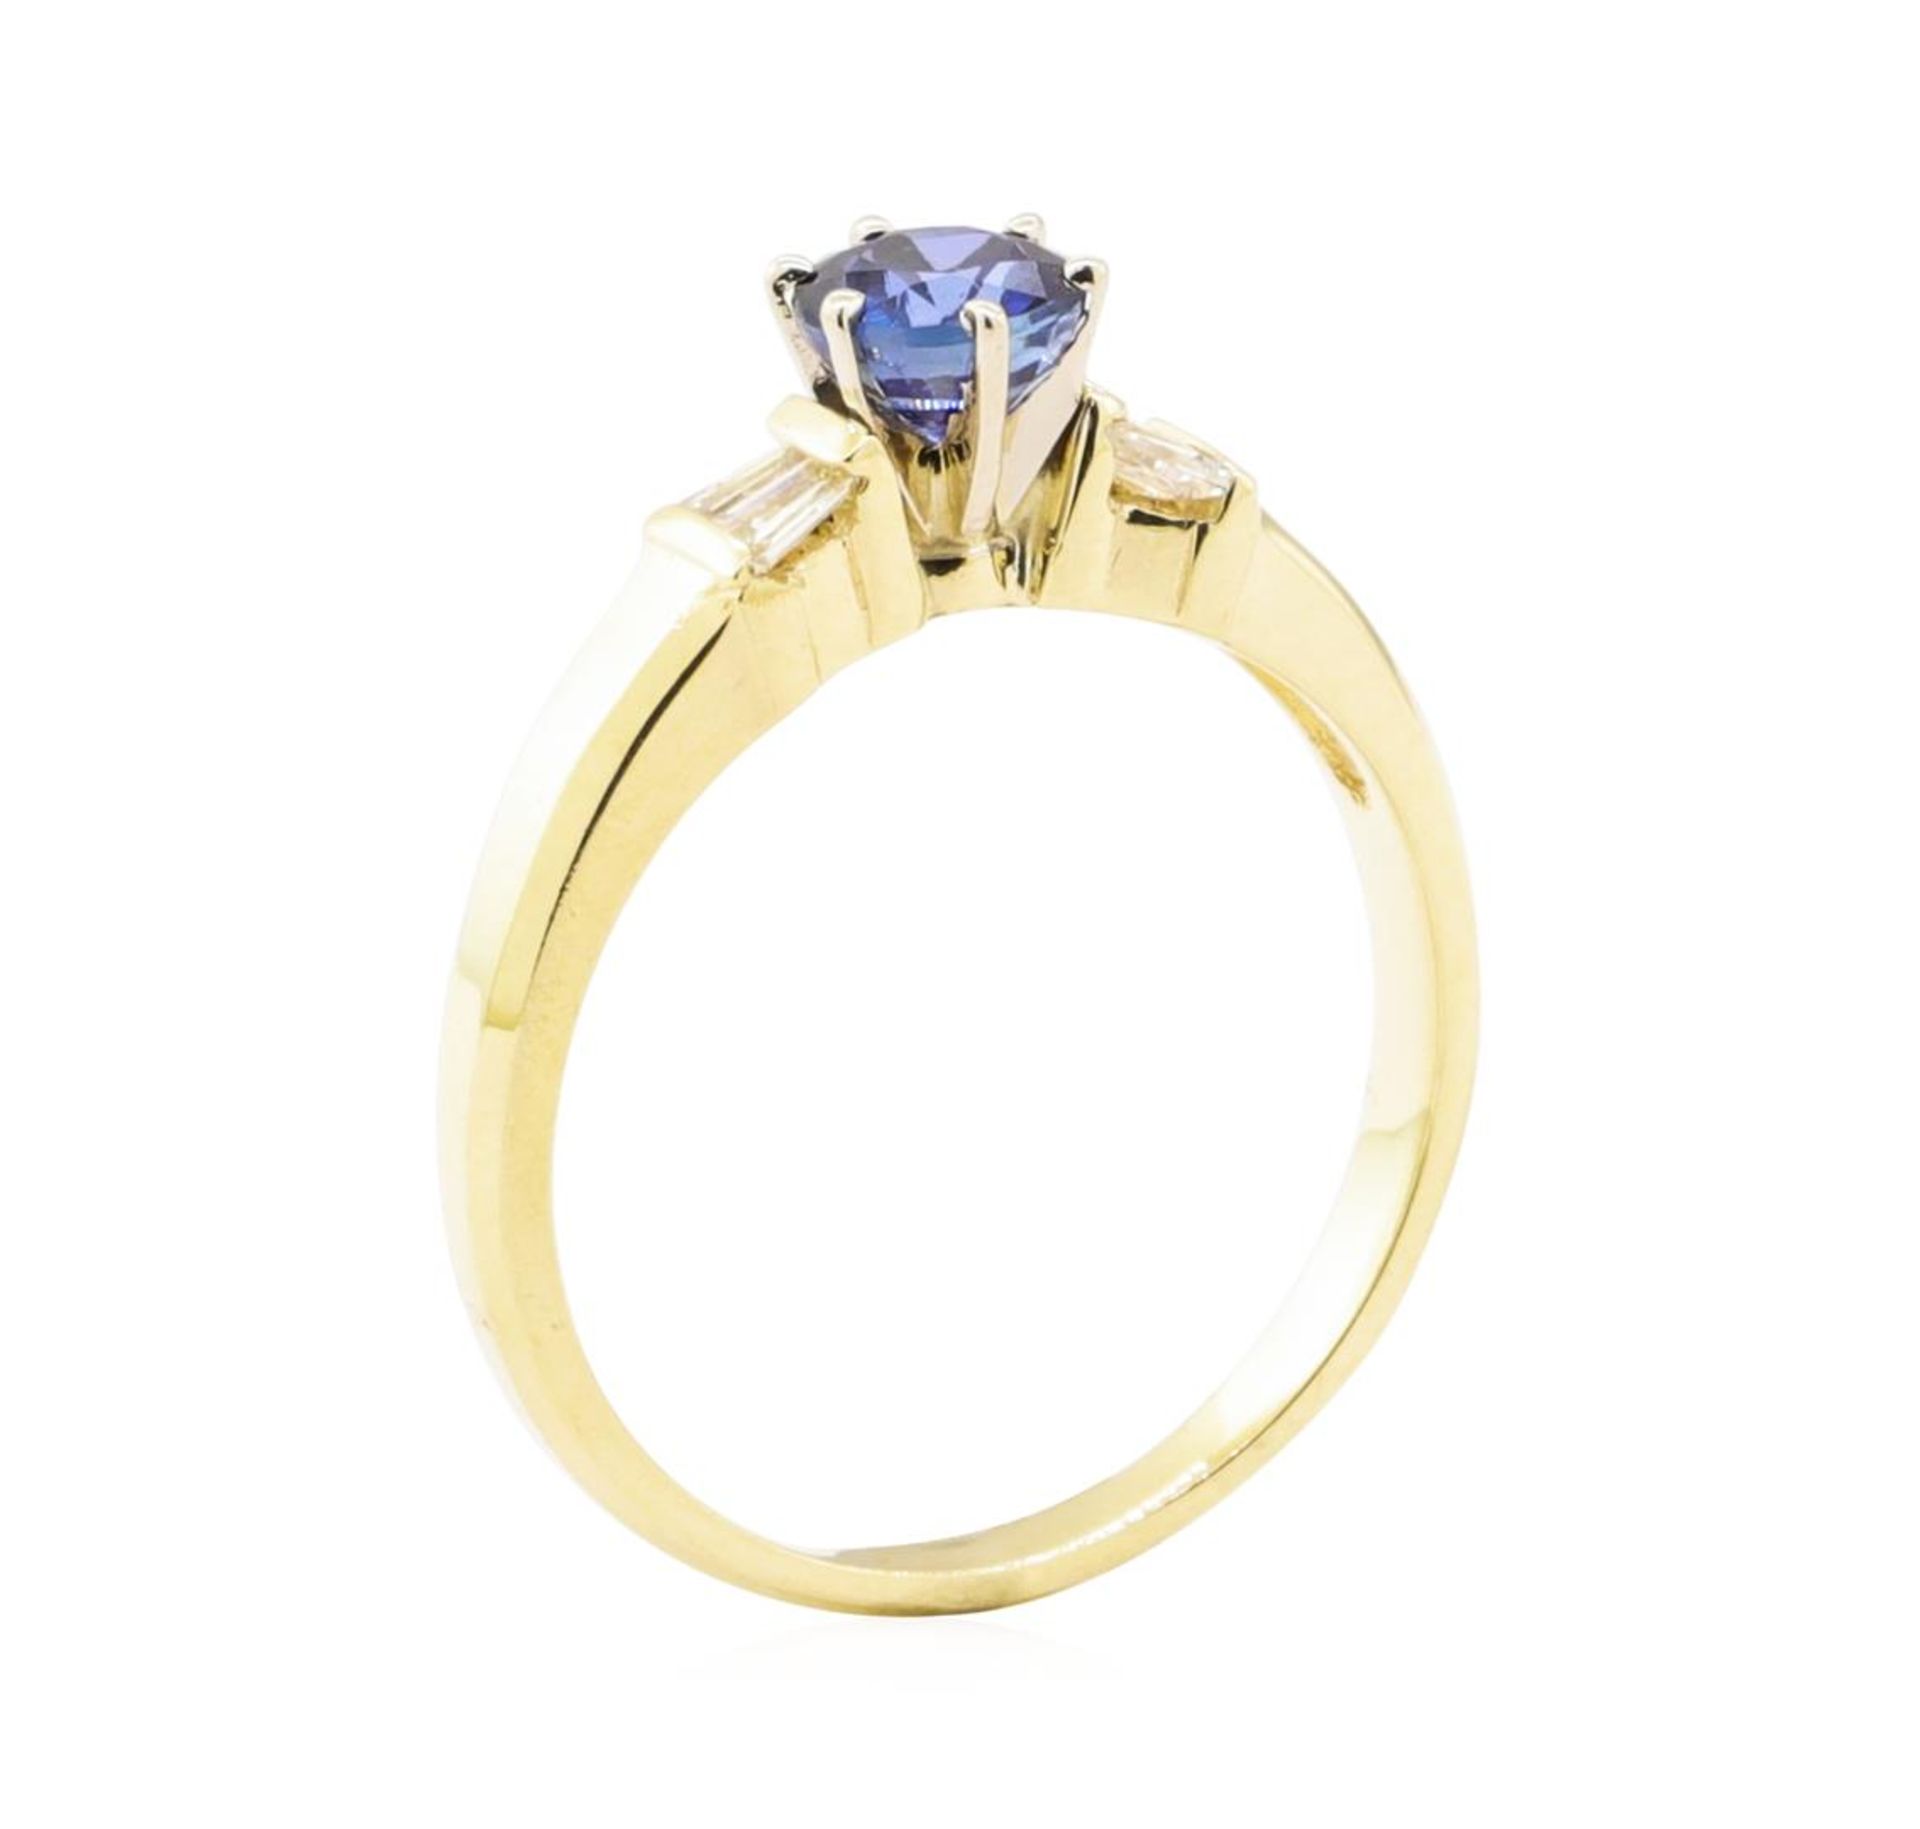 0.98 ctw Blue Sapphire and Diamond Ring - 14KT Yellow Gold - Image 4 of 4